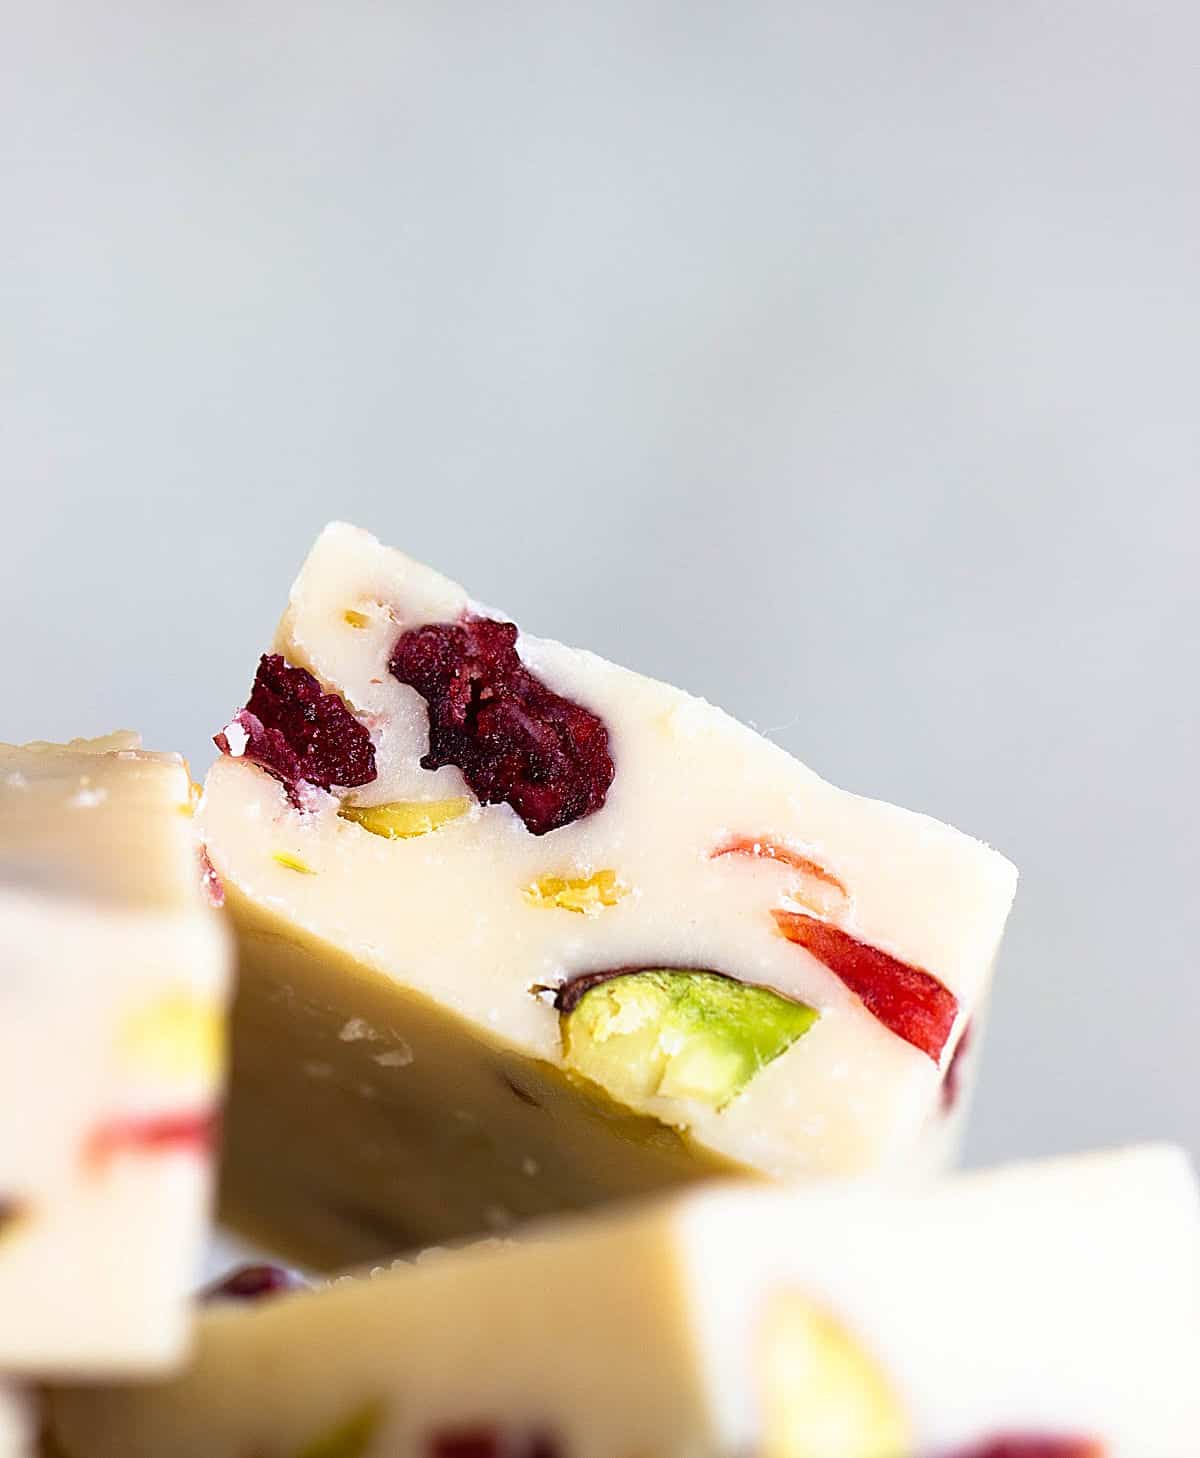 Close-up image of piece of white fudge with cranberries and pistachios, grey background.